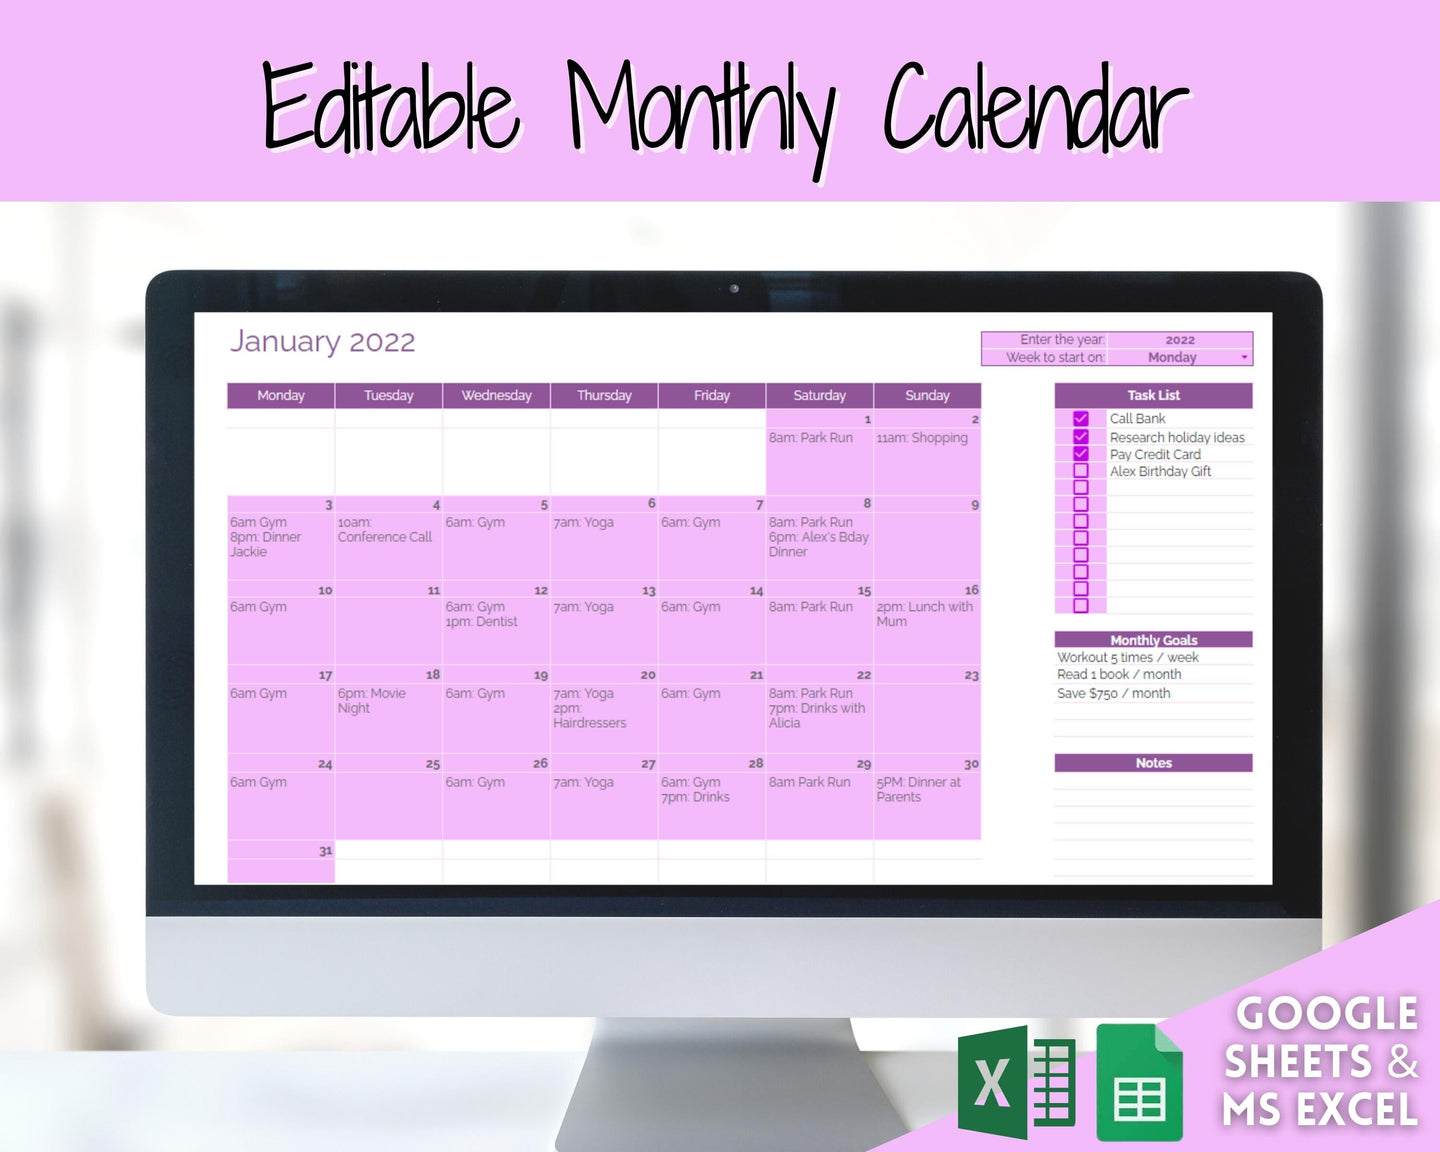 EDITABLE Monthly Calendar, Monthly Planner Template, Automated Spreadsheet, Google Sheets, Excel, Annual, To Do List, Undated Schedule - Purple